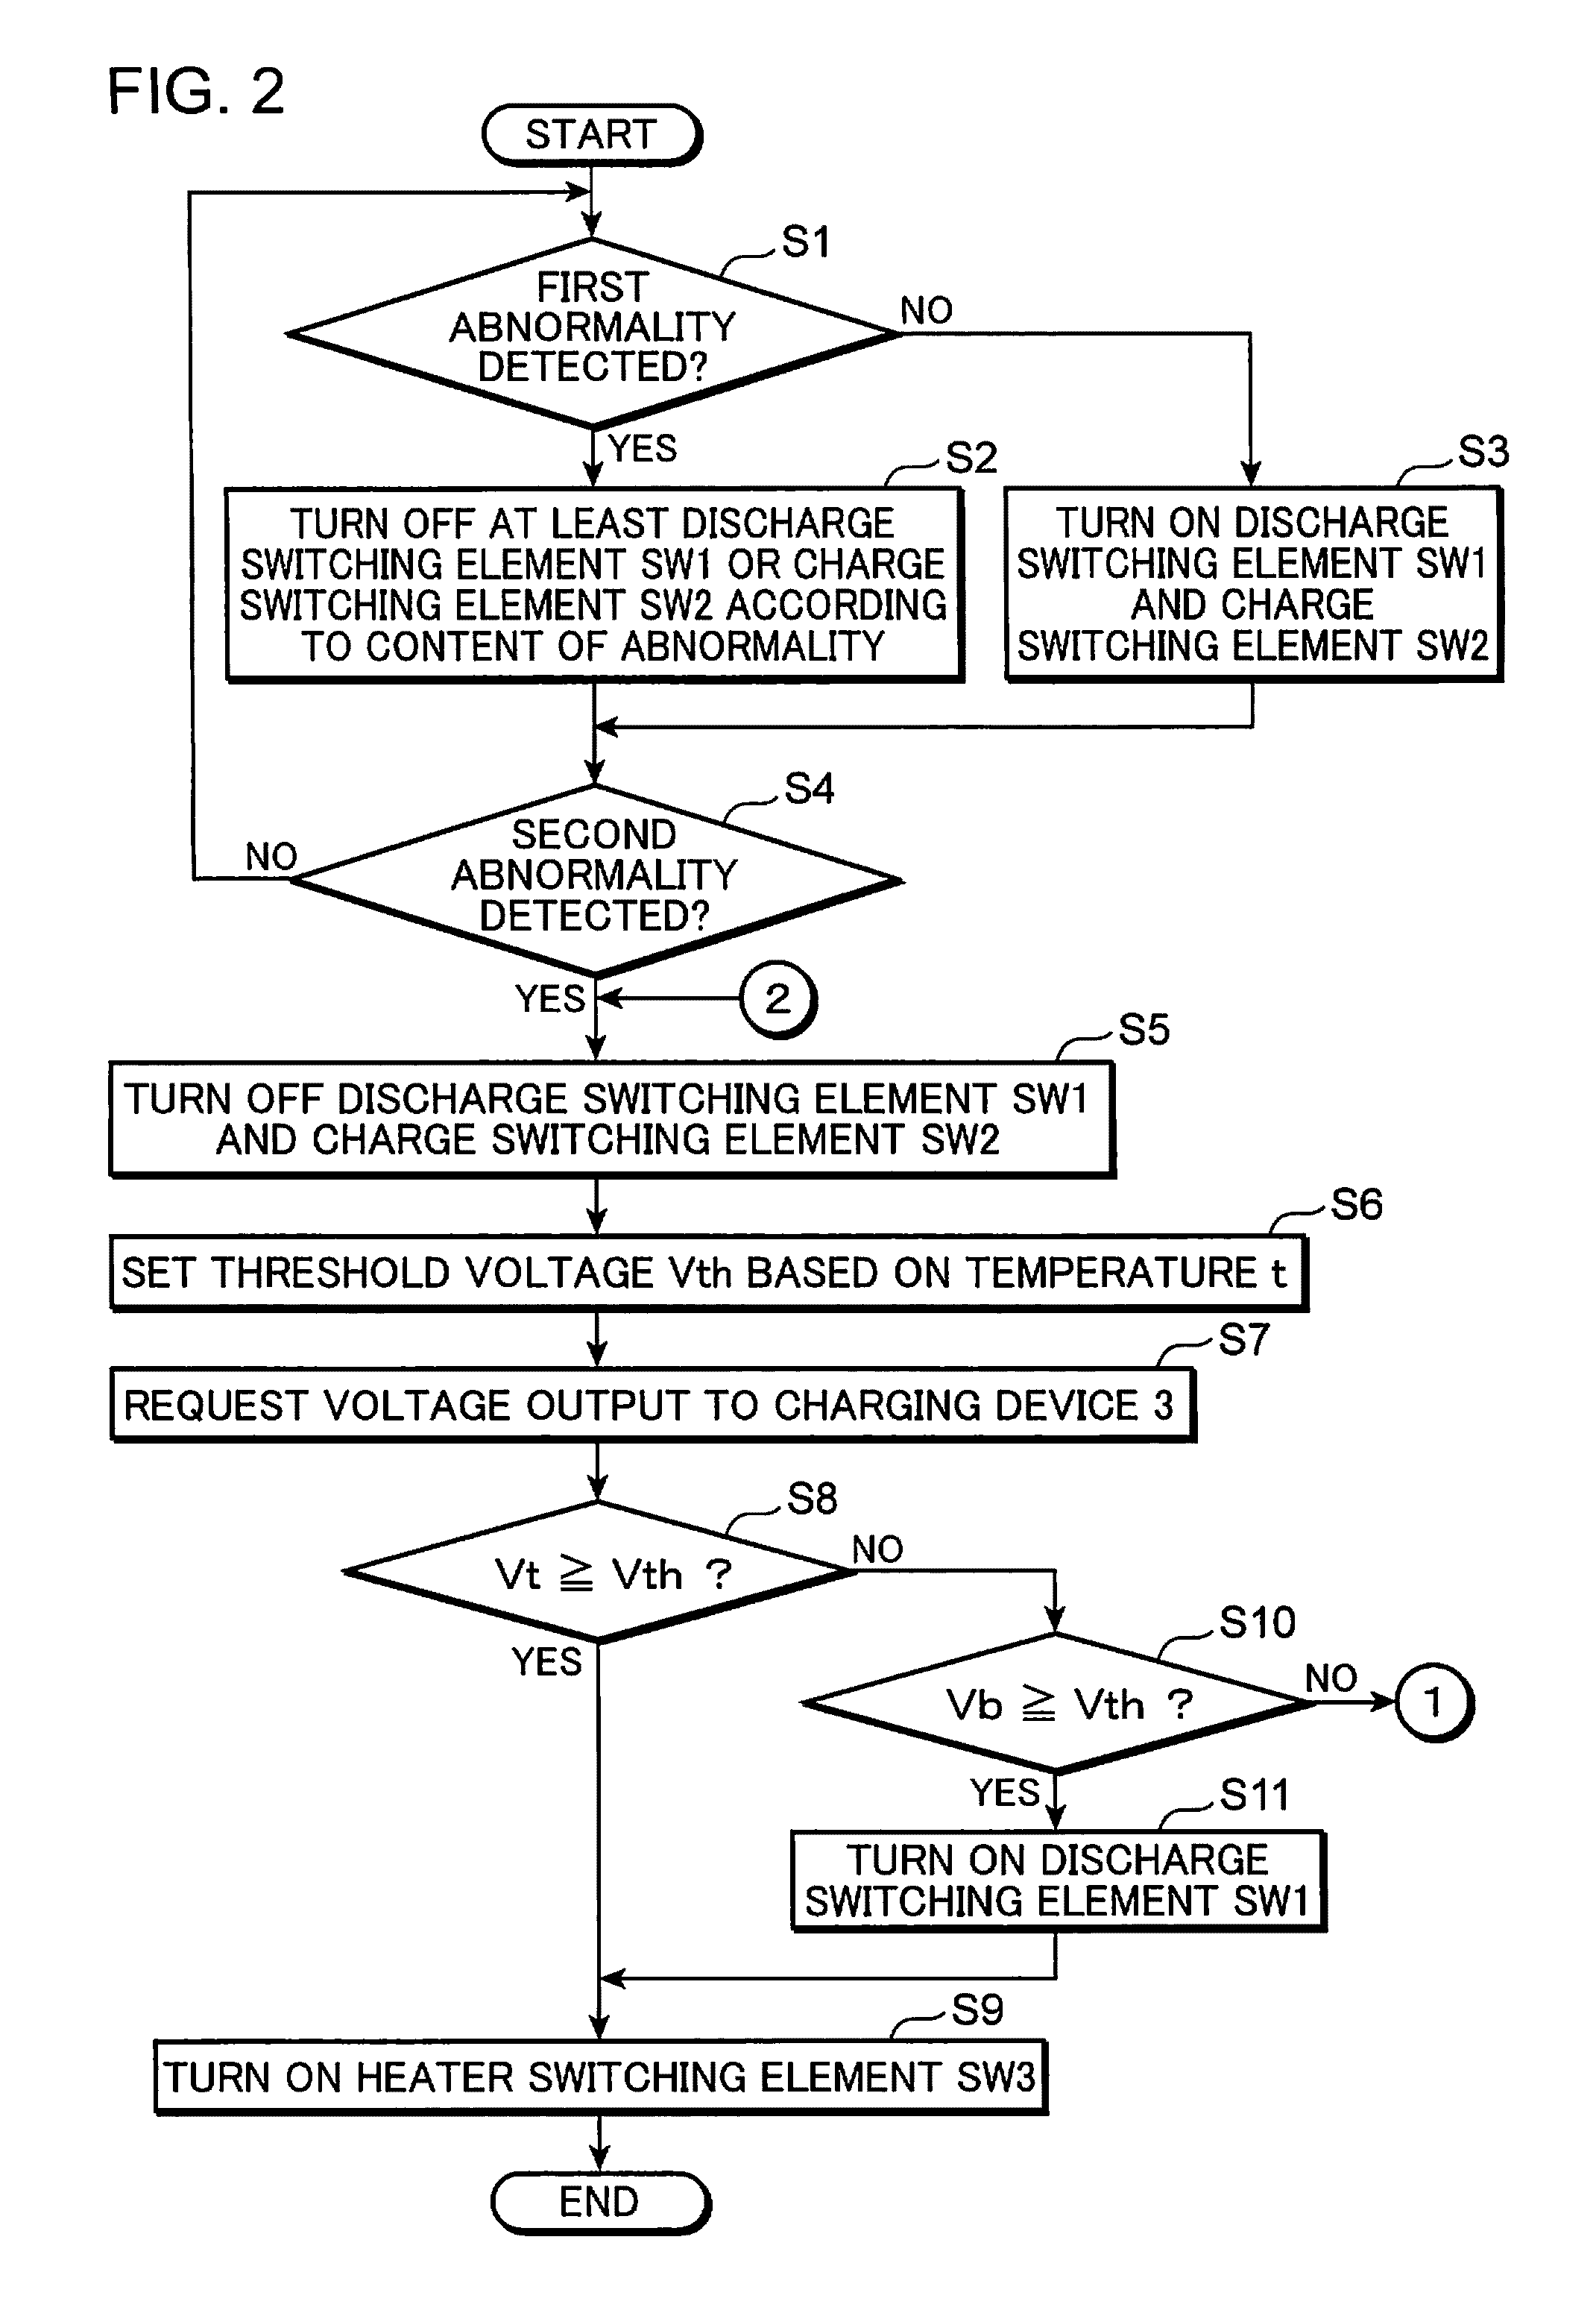 Protection circuit, battery pack and charging system